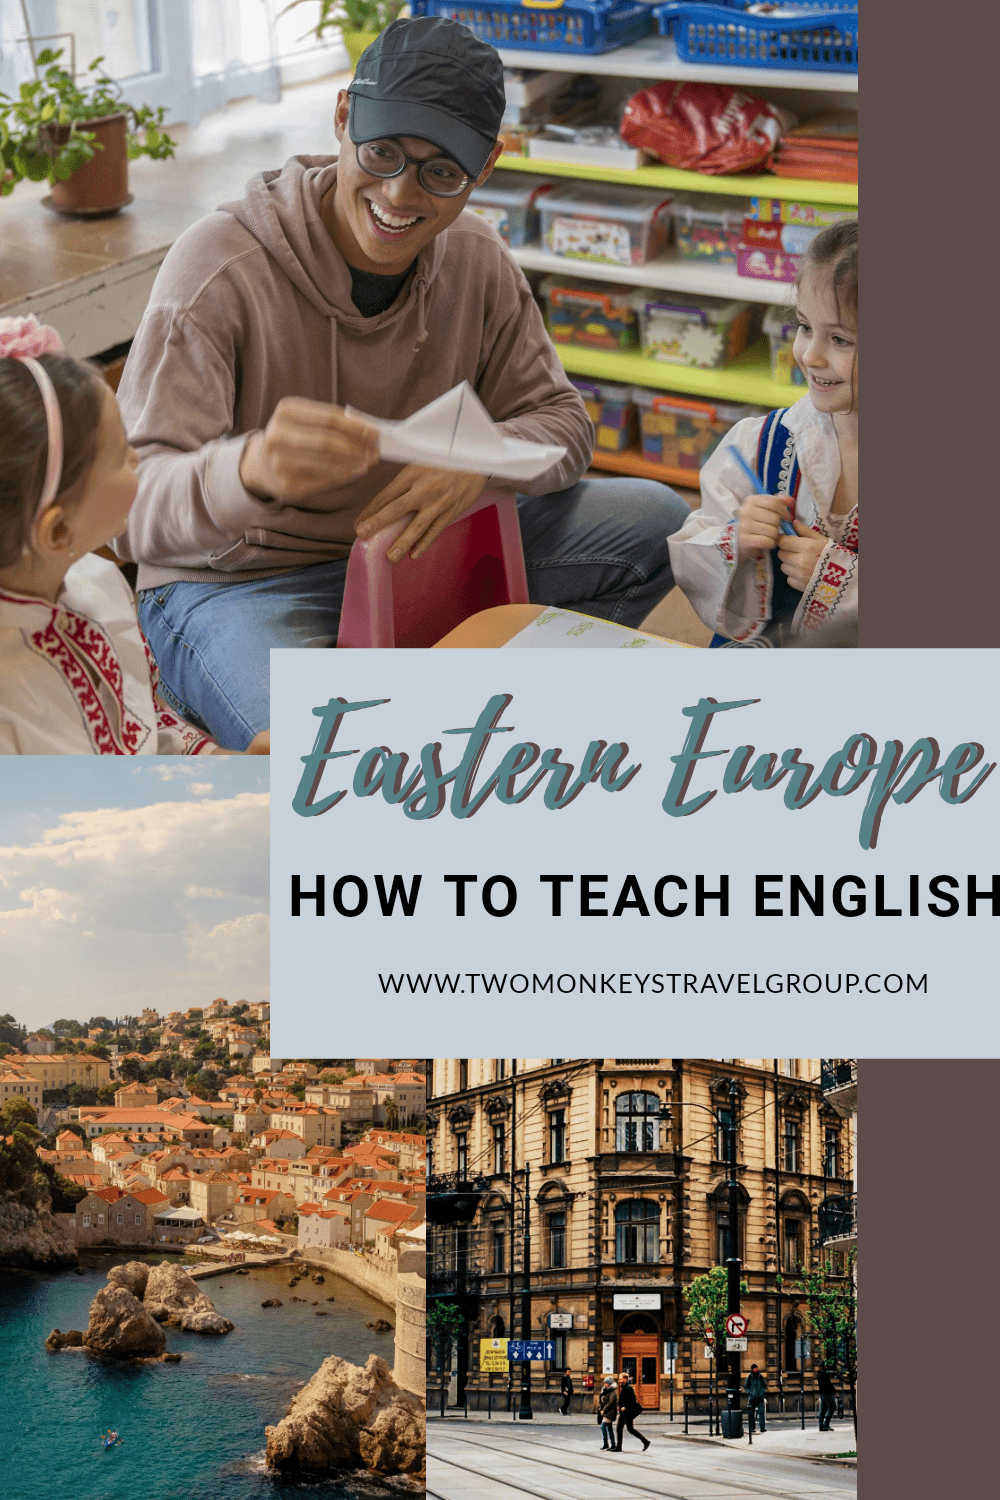 How to Teach English in Eastern Europe – Pros & Cons of Living as an English Teacher